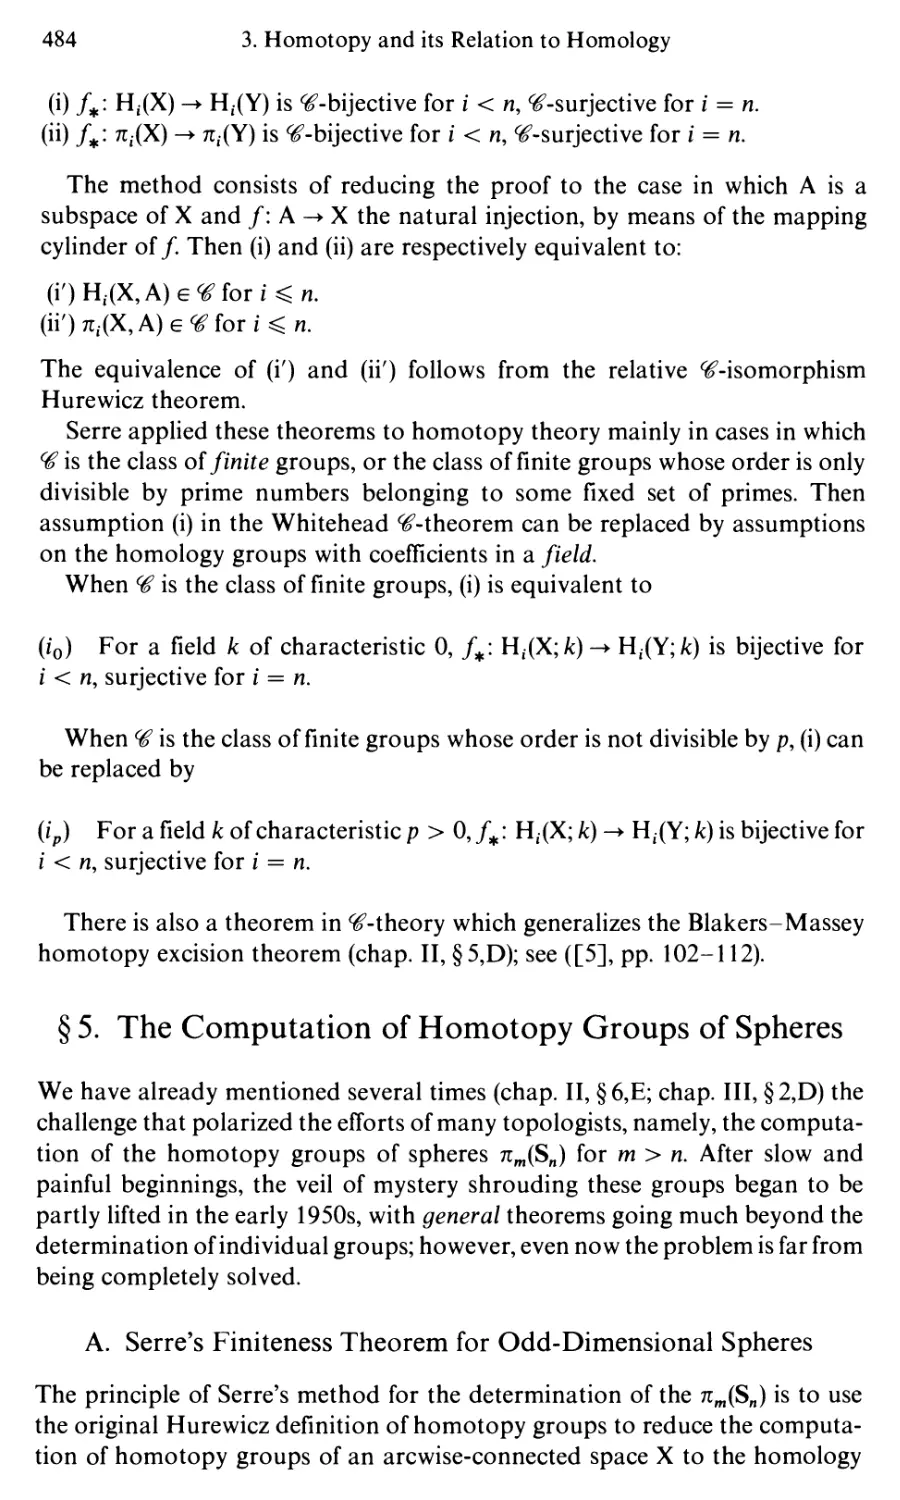 §5. The Computation of Homotopy Groups of Spheres